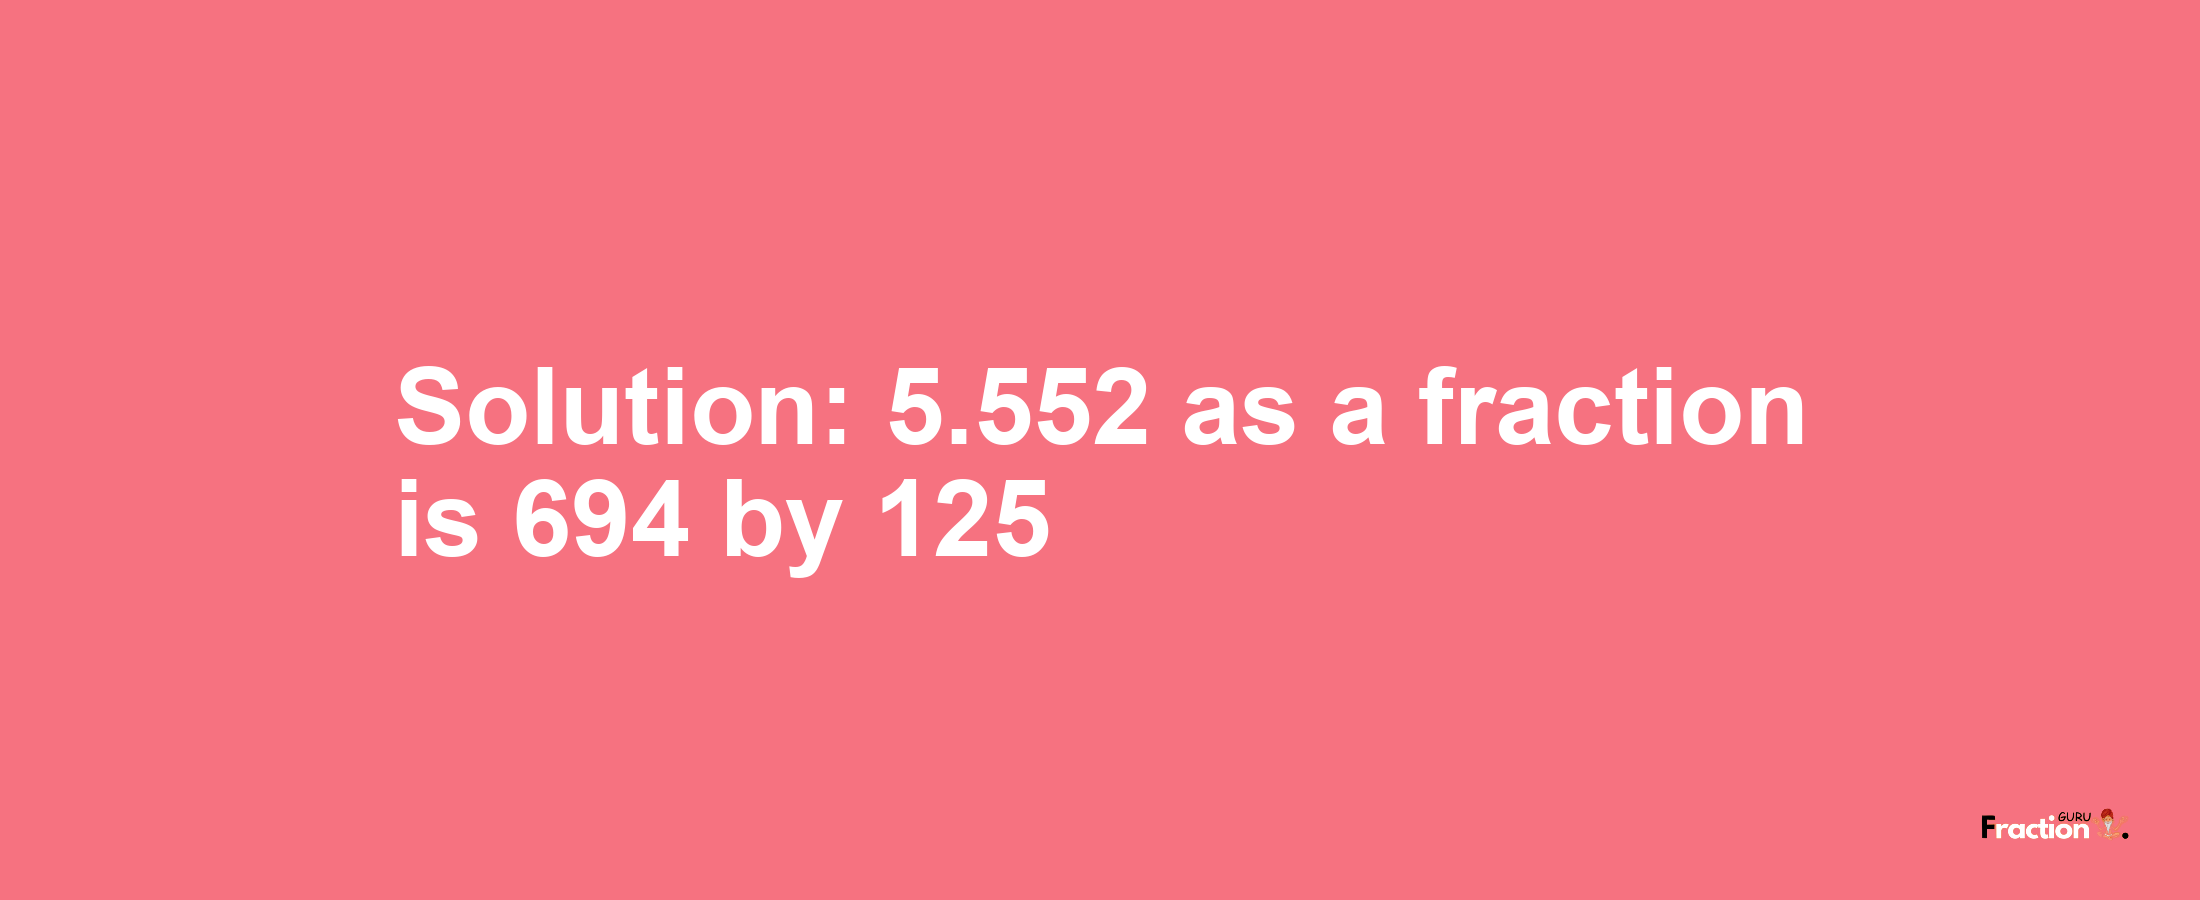 Solution:5.552 as a fraction is 694/125